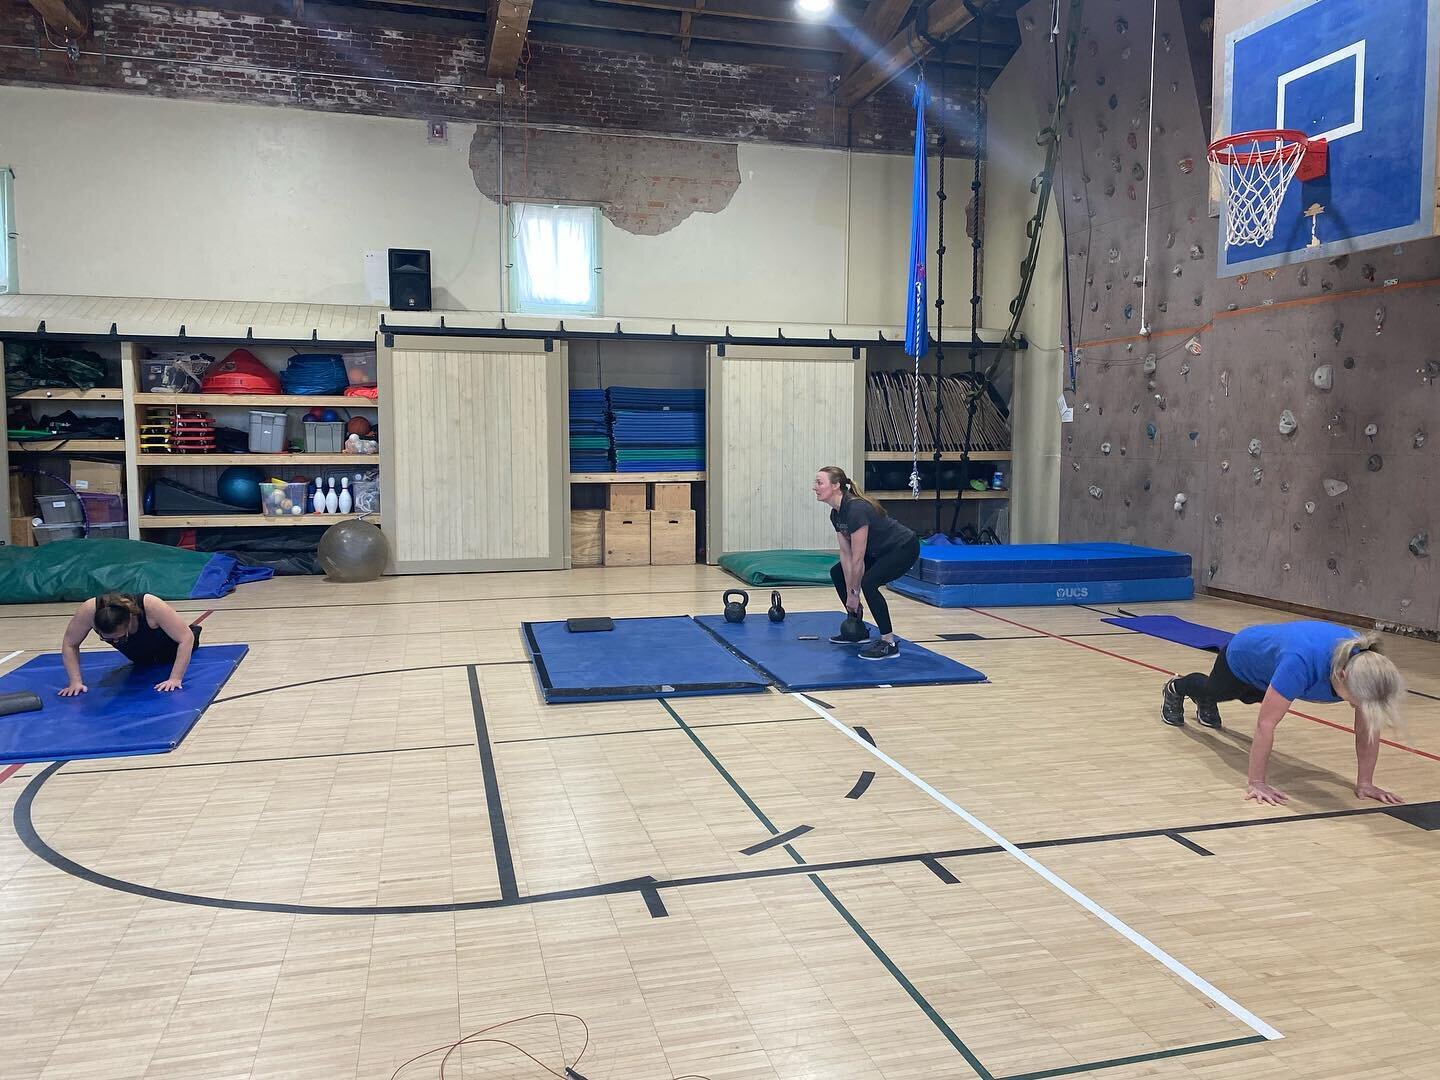 We did a benchmark workout today!!
March 50 - For Time
50 KB deadlifts
50 push-ups
50 calories on rower
50 jump rope singles
50 sit-ups

#elevatedphysique #groupsessions #lakecityco #lakecity #workout #wod